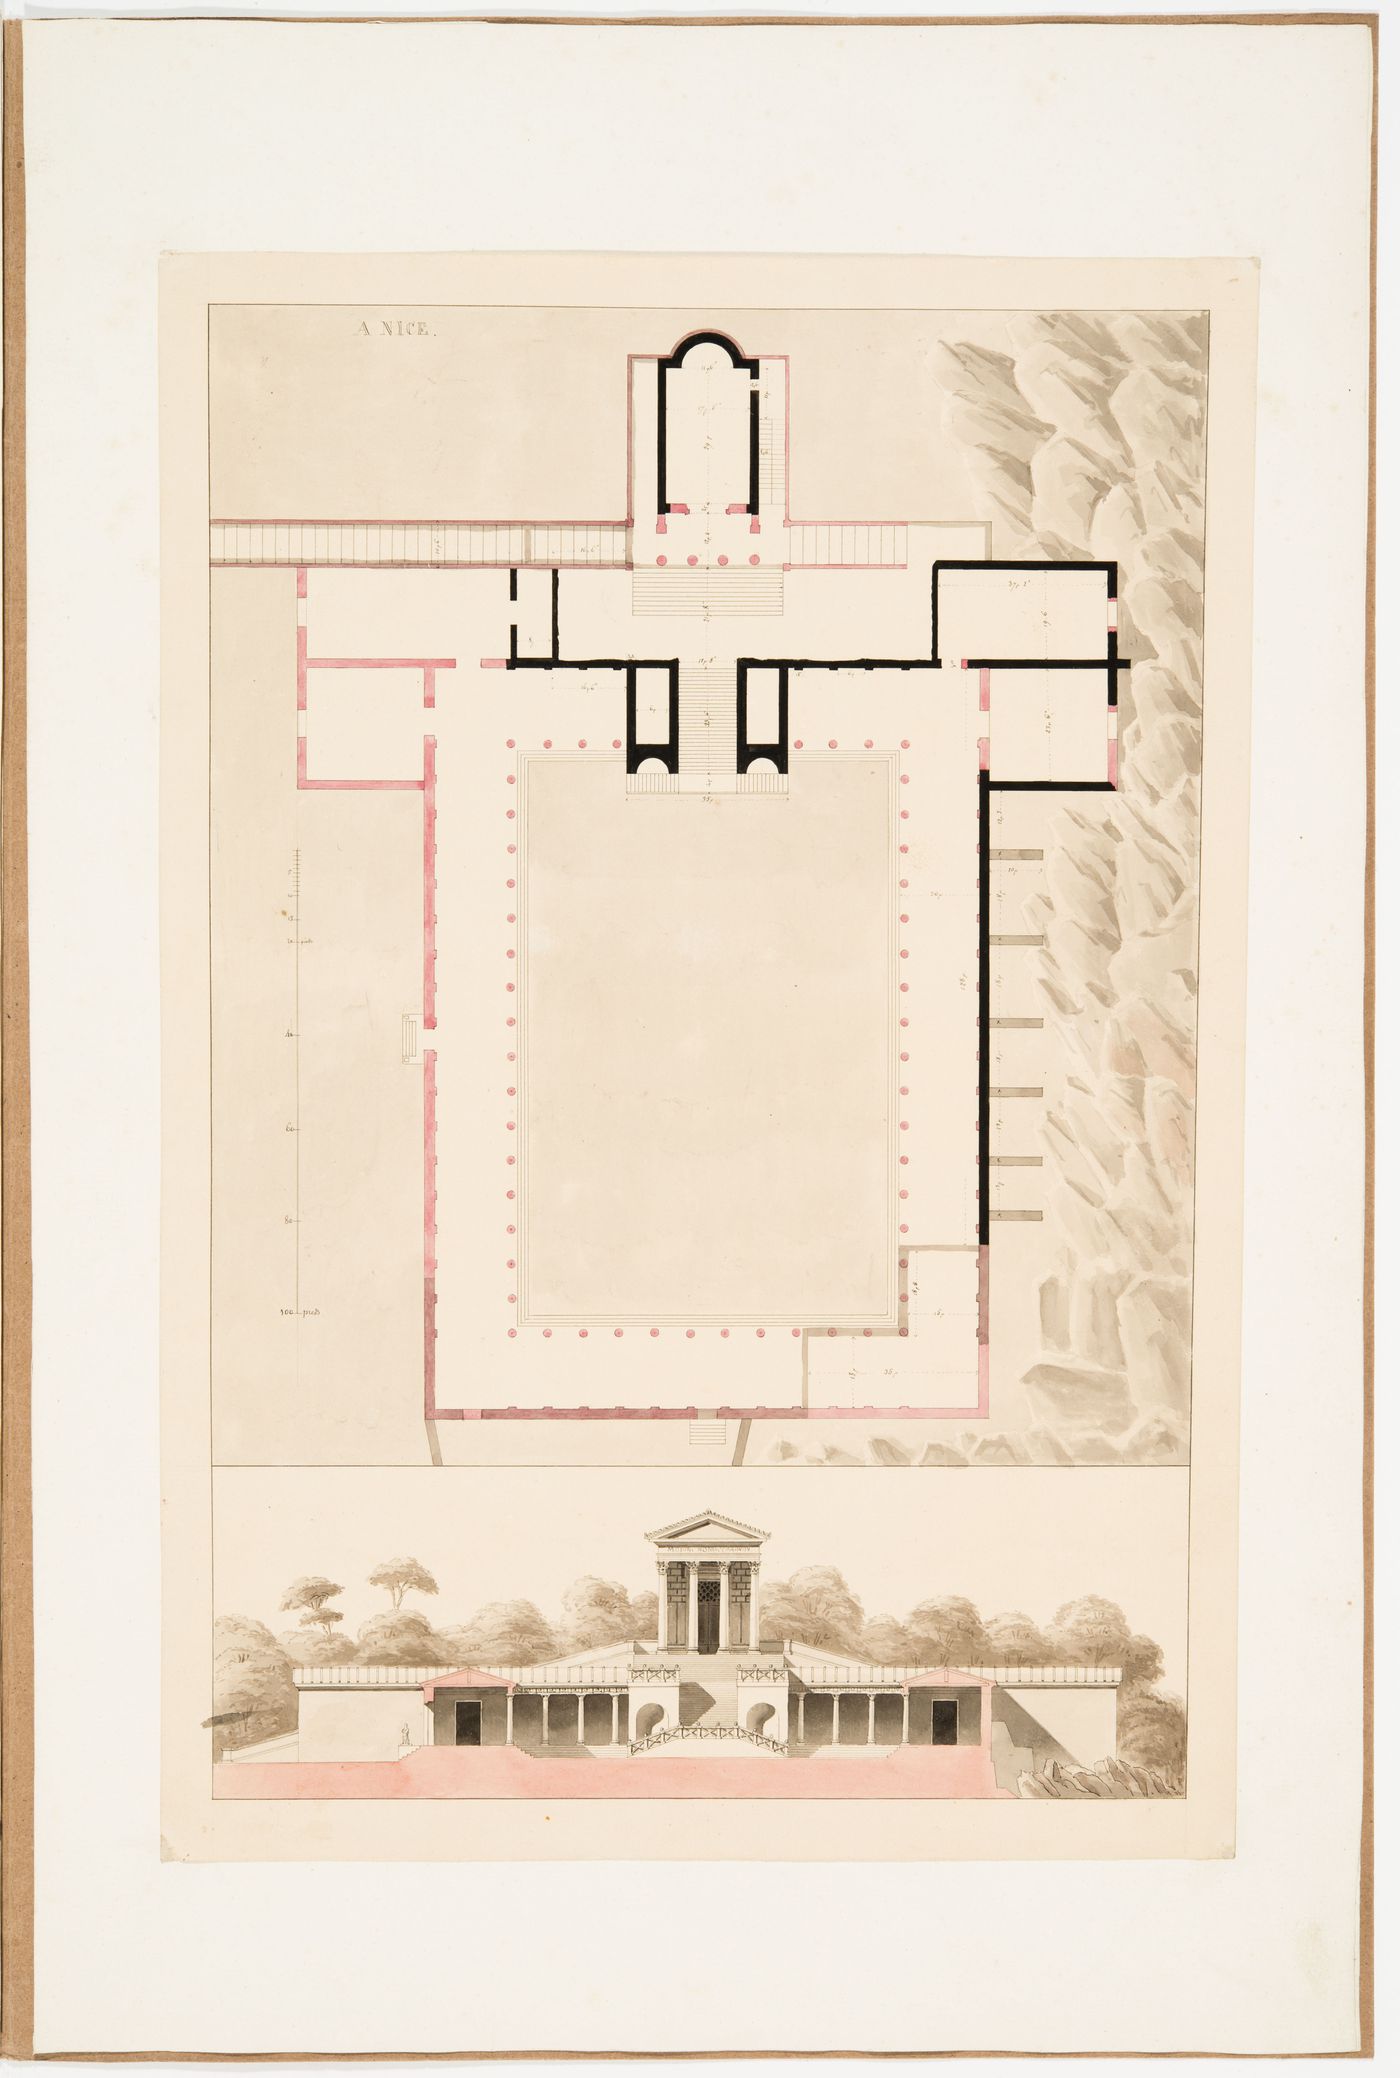 Plan of a villa in Nice showing the peristyle garden, corridor, and apsidal audience hall, with a front elevation of the apsidal audience hall and part of the peristyle